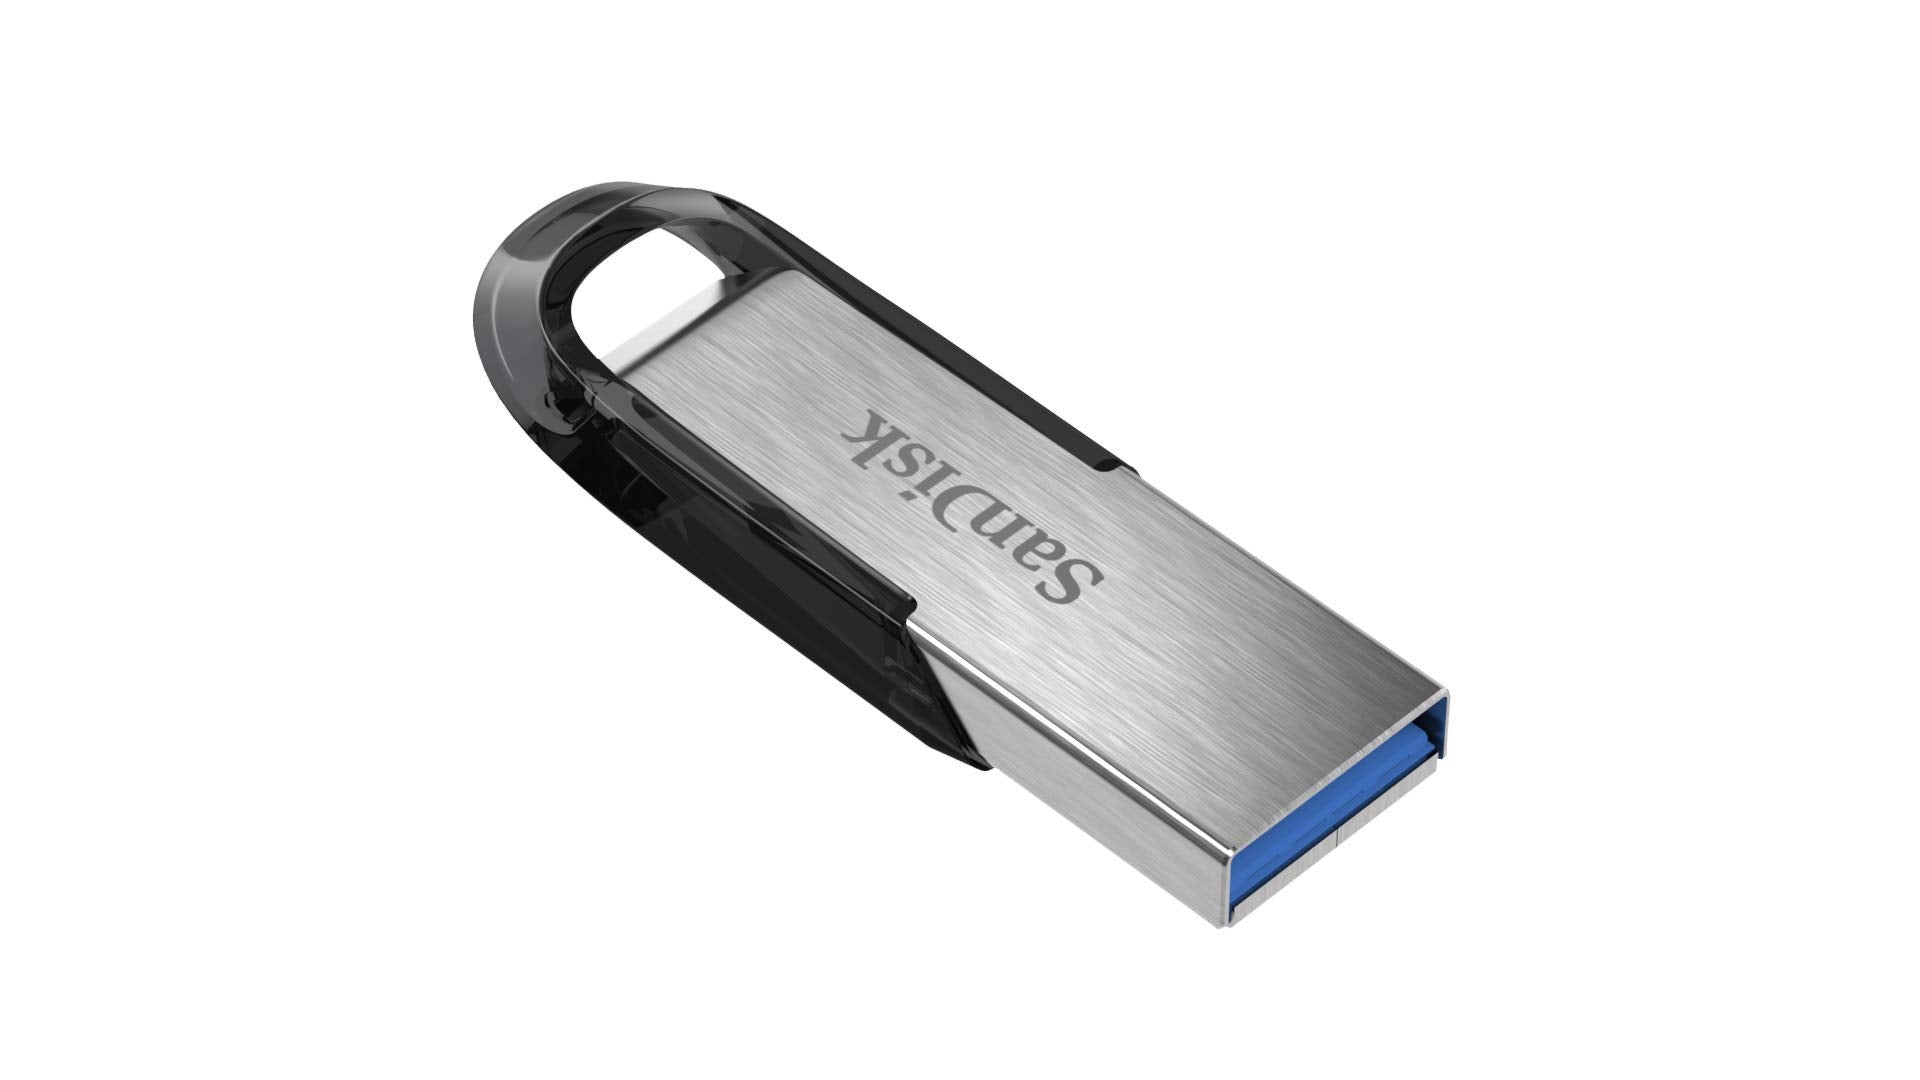 Sandisk ultra flair 3.0 flash drive up to 150mb/s